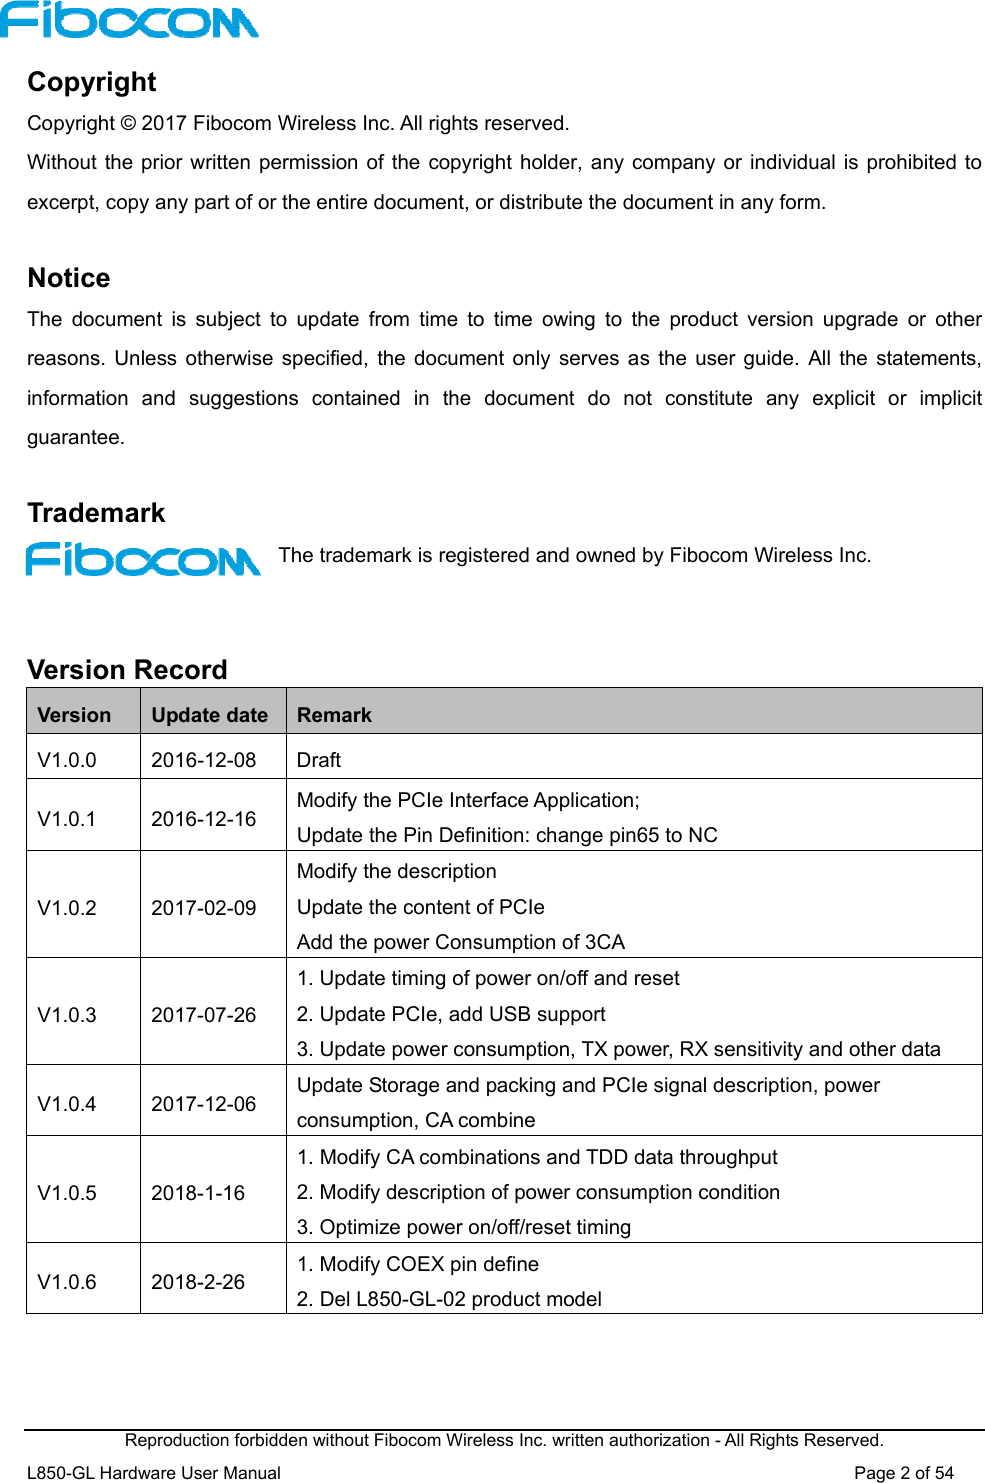  Reproduction forbidden without Fibocom Wireless Inc. written authorization - All Rights Reserved. L850-GL Hardware User Manual                                                                 Page 2 of 54 Copyright Copyright © 2017 Fibocom Wireless Inc. All rights reserved. Without the prior written permission of the copyright holder, any company or individual is prohibited to excerpt, copy any part of or the entire document, or distribute the document in any form.  Notice The  document  is  subject  to  update  from  time  to  time  owing  to  the  product  version  upgrade  or  other reasons.  Unless  otherwise specified,  the  document only  serves as the user guide. All the statements, information  and  suggestions  contained  in  the  document  do  not  constitute  any  explicit  or  implicit guarantee.  Trademark The trademark is registered and owned by Fibocom Wireless Inc.   Version Record Version  Update date  Remark V1.0.0  2016-12-08  Draft V1.0.1  2016-12-16  Modify the PCIe Interface Application; Update the Pin Definition: change pin65 to NC V1.0.2  2017-02-09 Modify the description   Update the content of PCIe Add the power Consumption of 3CA V1.0.3  2017-07-26 1. Update timing of power on/off and reset 2. Update PCIe, add USB support 3. Update power consumption, TX power, RX sensitivity and other data V1.0.4  2017-12-06  Update Storage and packing and PCIe signal description, power consumption, CA combine V1.0.5  2018-1-16 1. Modify CA combinations and TDD data throughput 2. Modify description of power consumption condition 3. Optimize power on/off/reset timing V1.0.6  2018-2-26  1. Modify COEX pin define 2. Del L850-GL-02 product model   